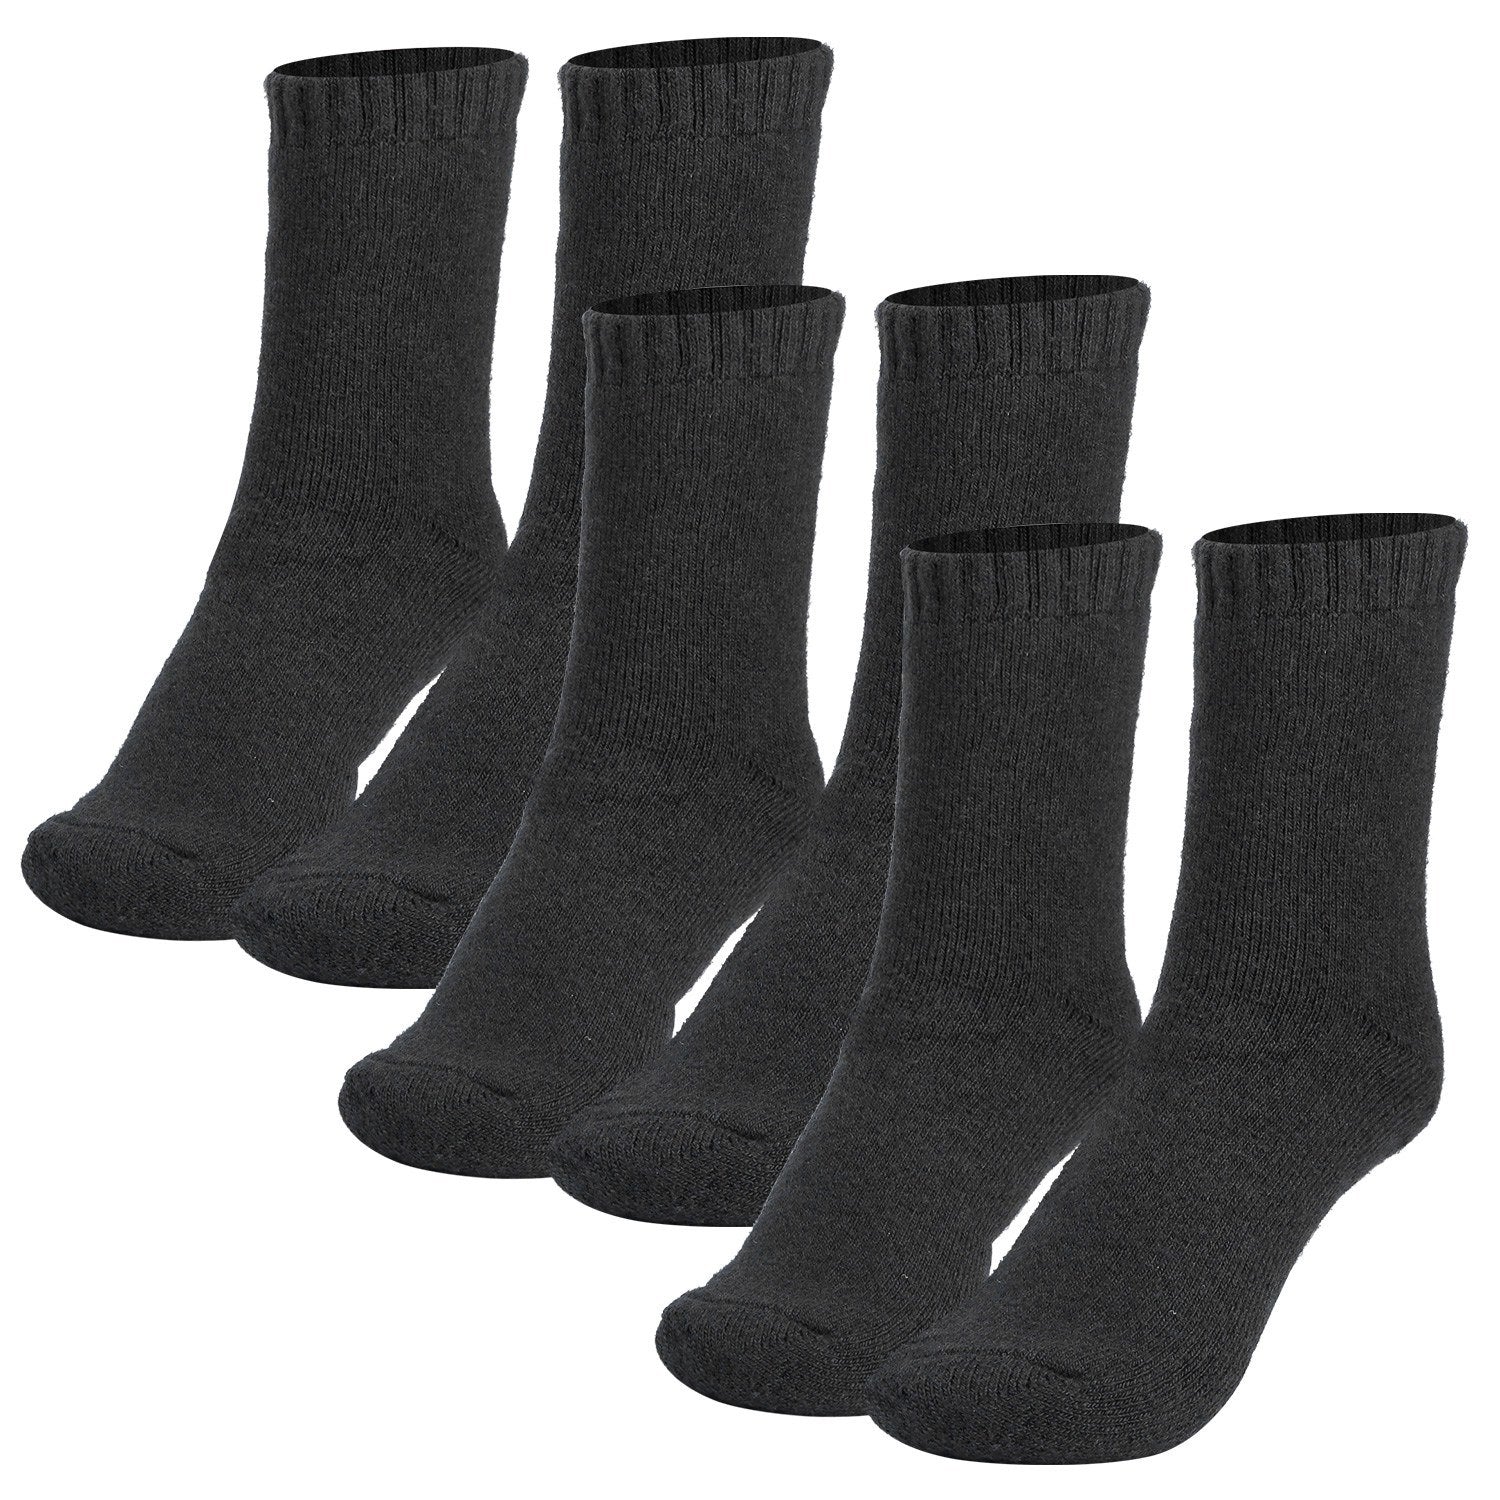 3 Pairs Men Warm Wool Socks Soft Cozy Winter Thermal Socks For Men Thick Heat-Trapping Moisture Wicking Socks